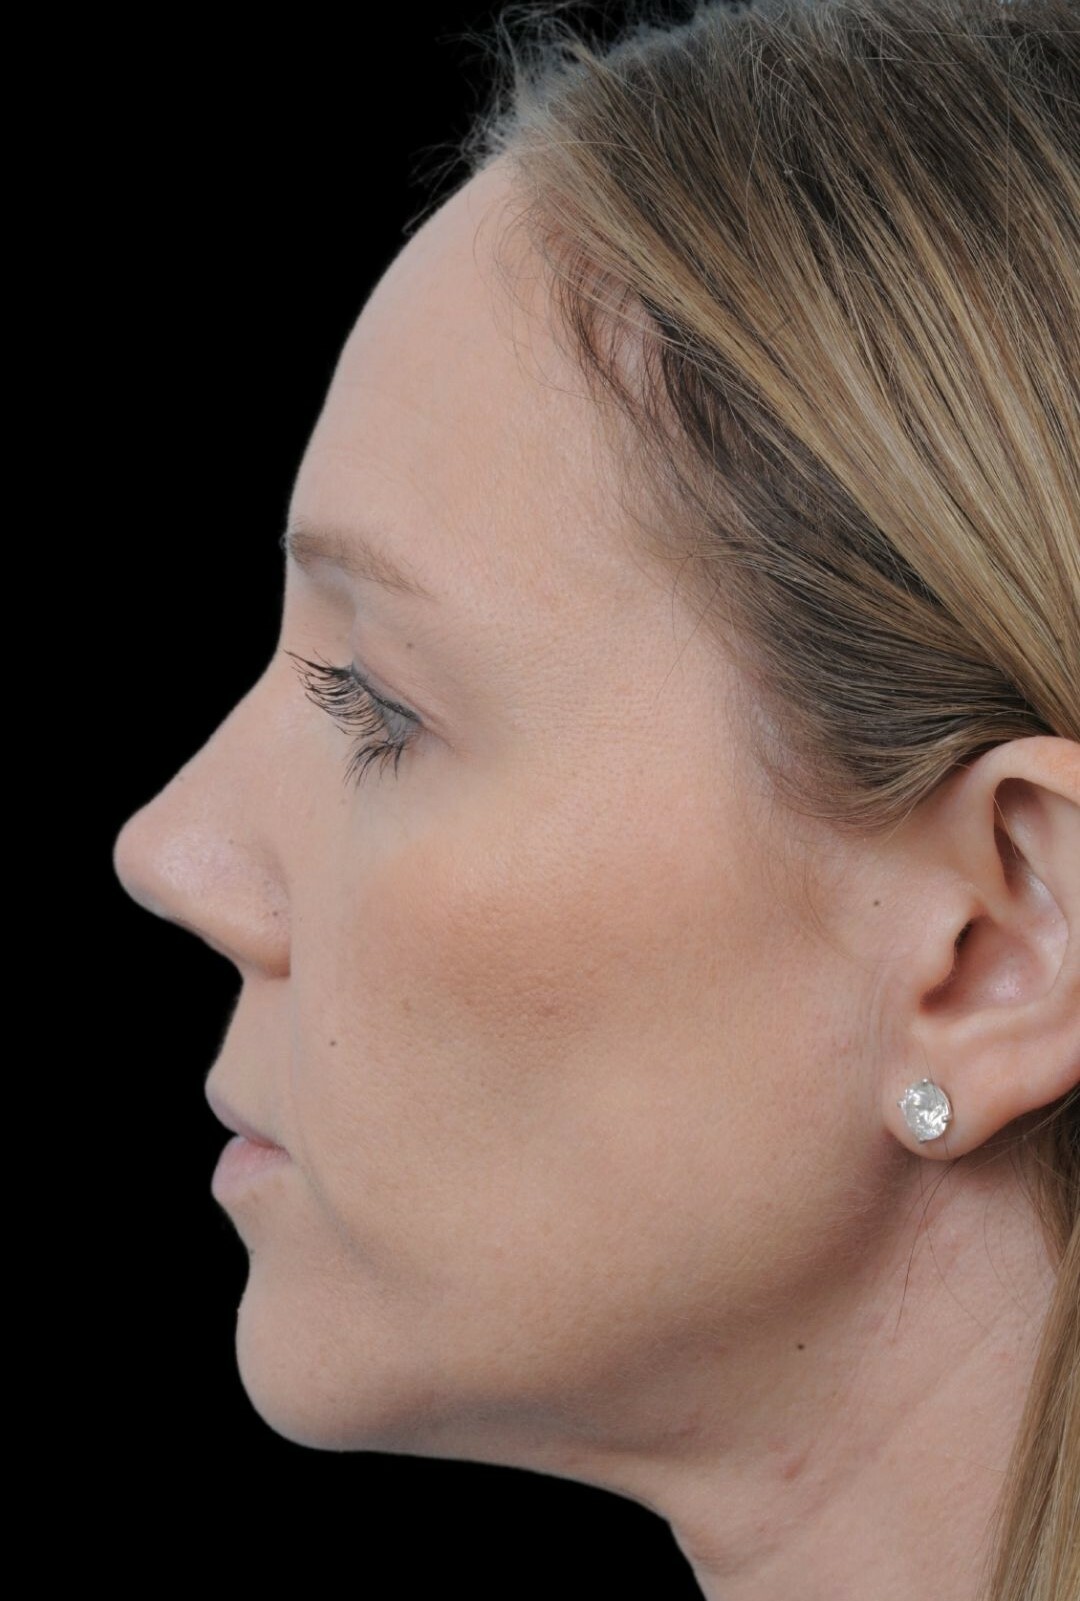 Photo of the patient’s face after the Rhinoplasty surgery. Patient 9 - Set 2